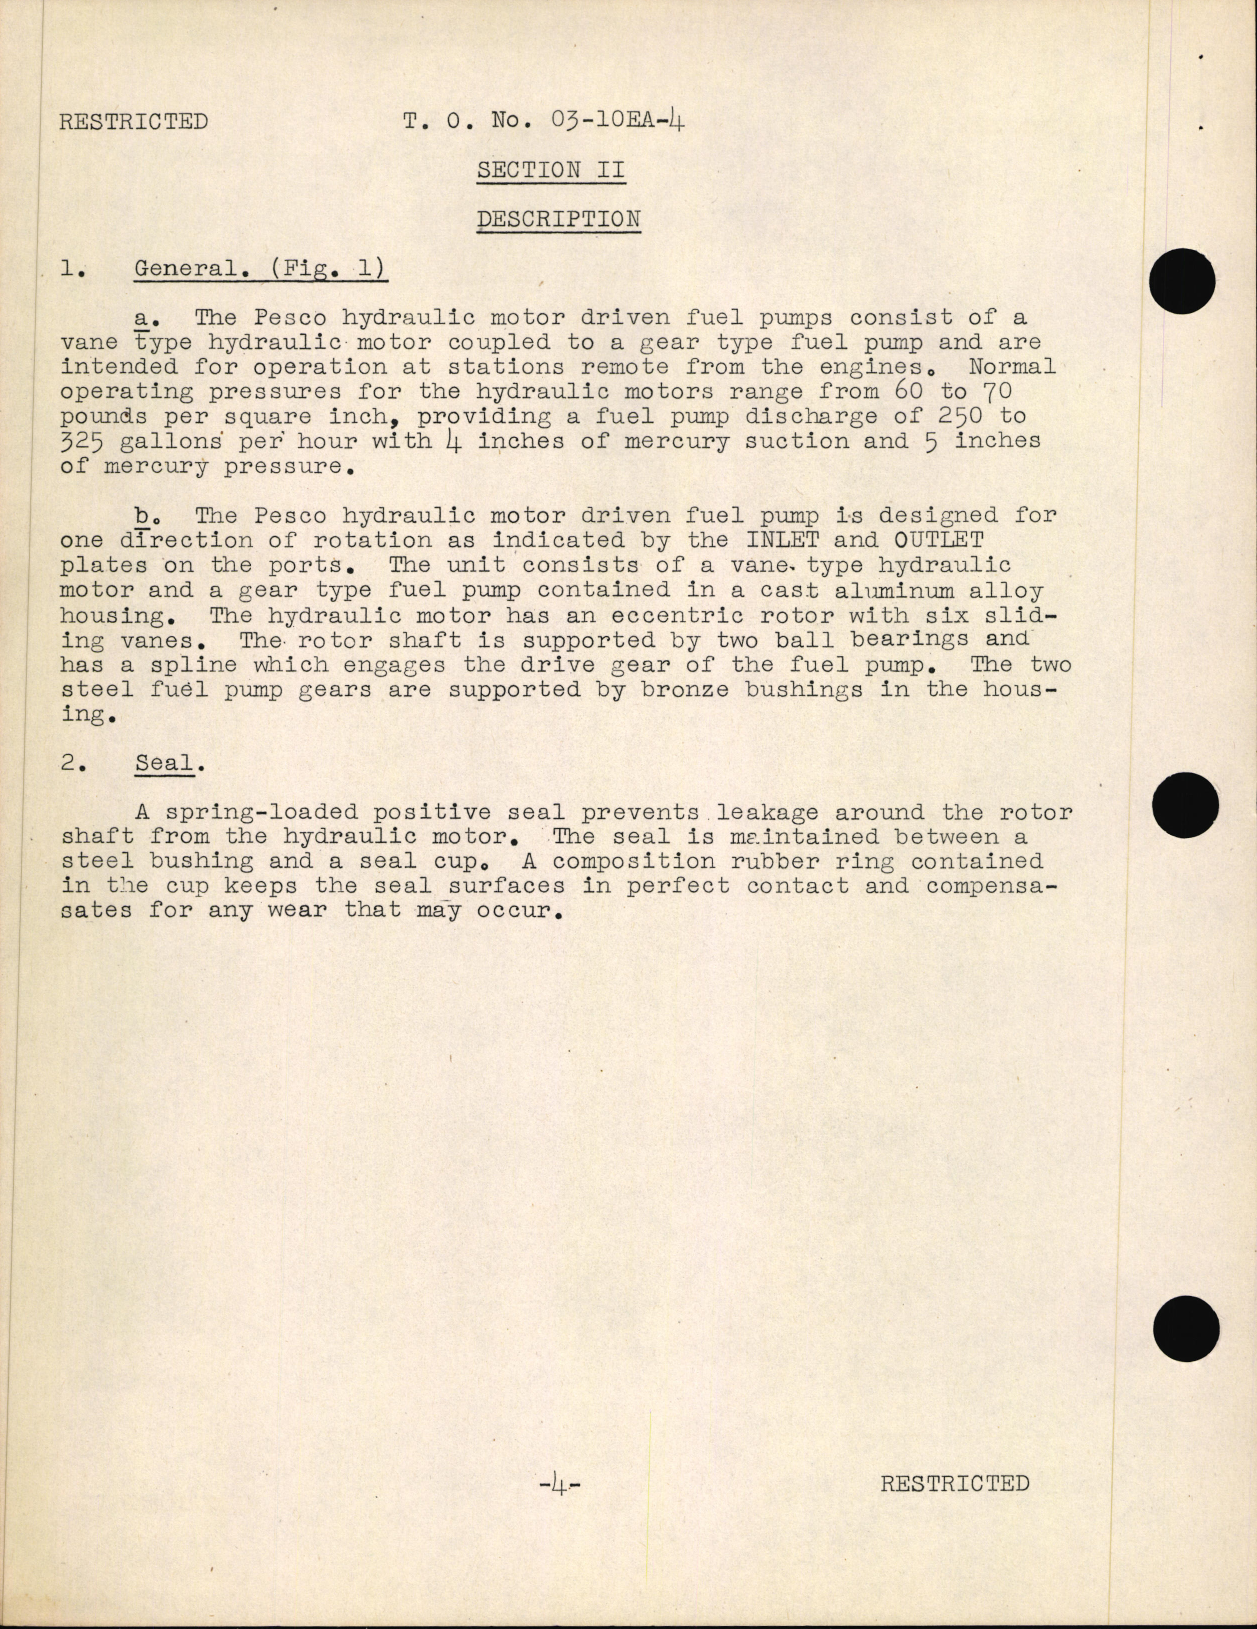 Sample page 6 from AirCorps Library document: Preliminary Handbook of Instructions with Parts Catalog for the Hydraulic Motor Driven Fuel Pump